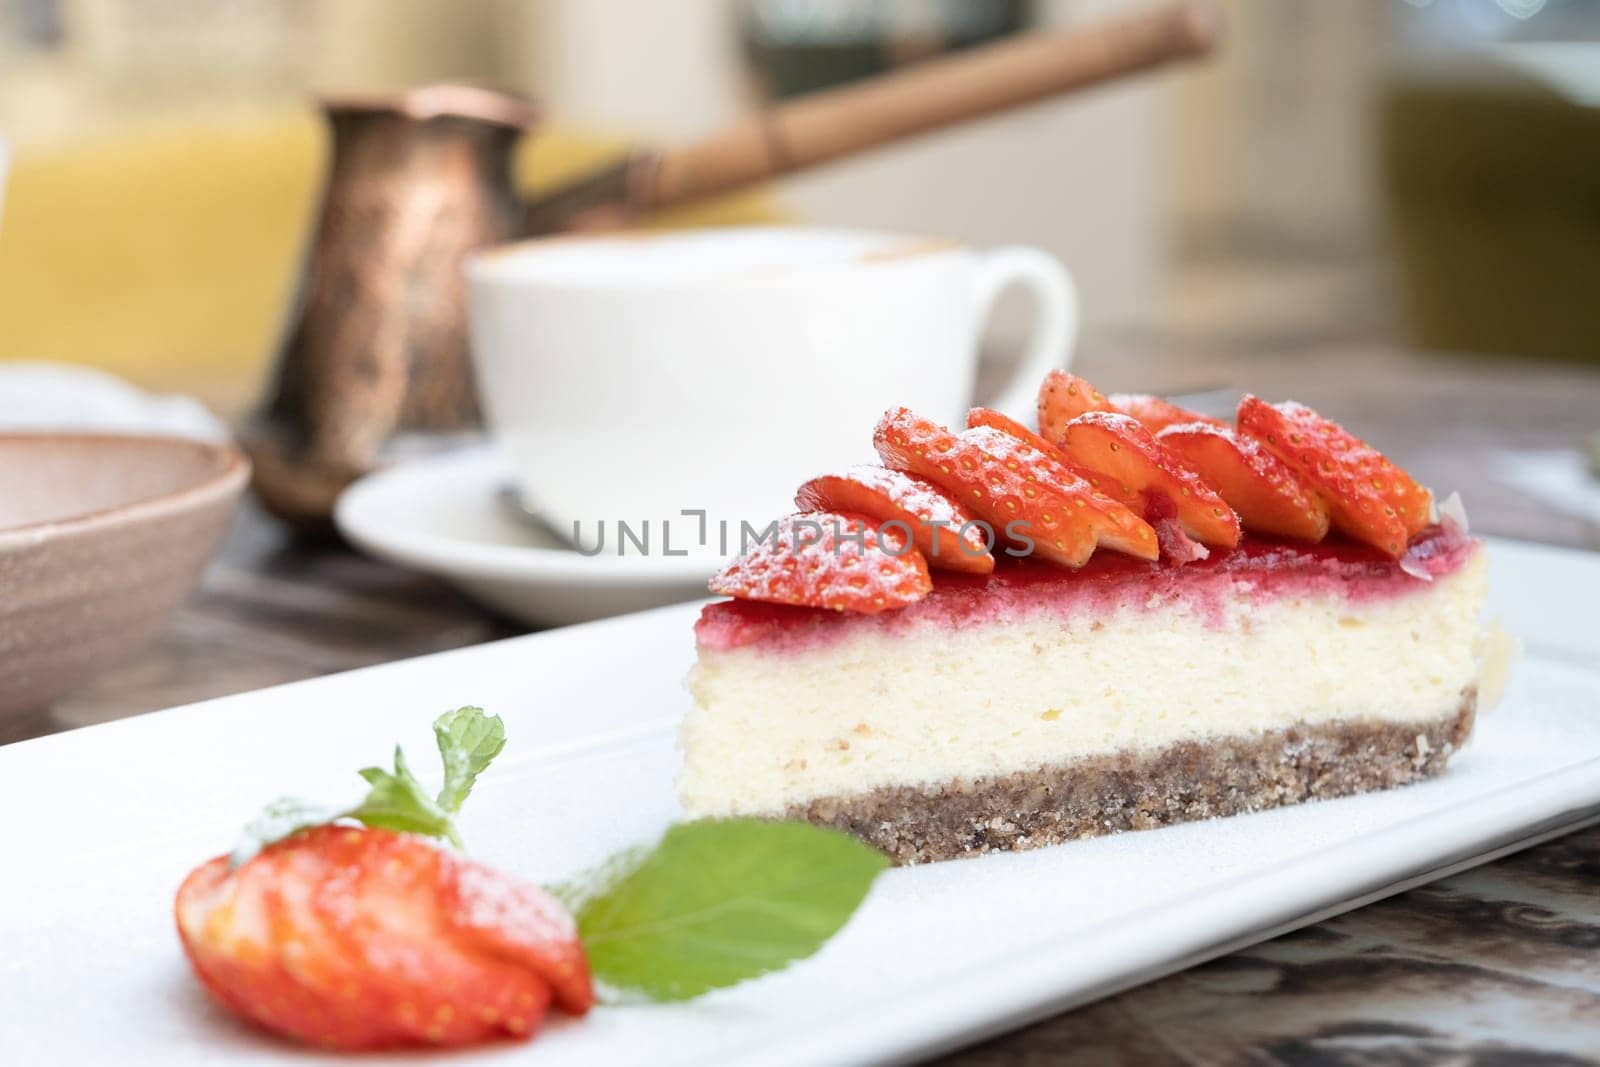 Piece of delicious cheesecake with berries on real cafe table close up. Cup of coffee on the background